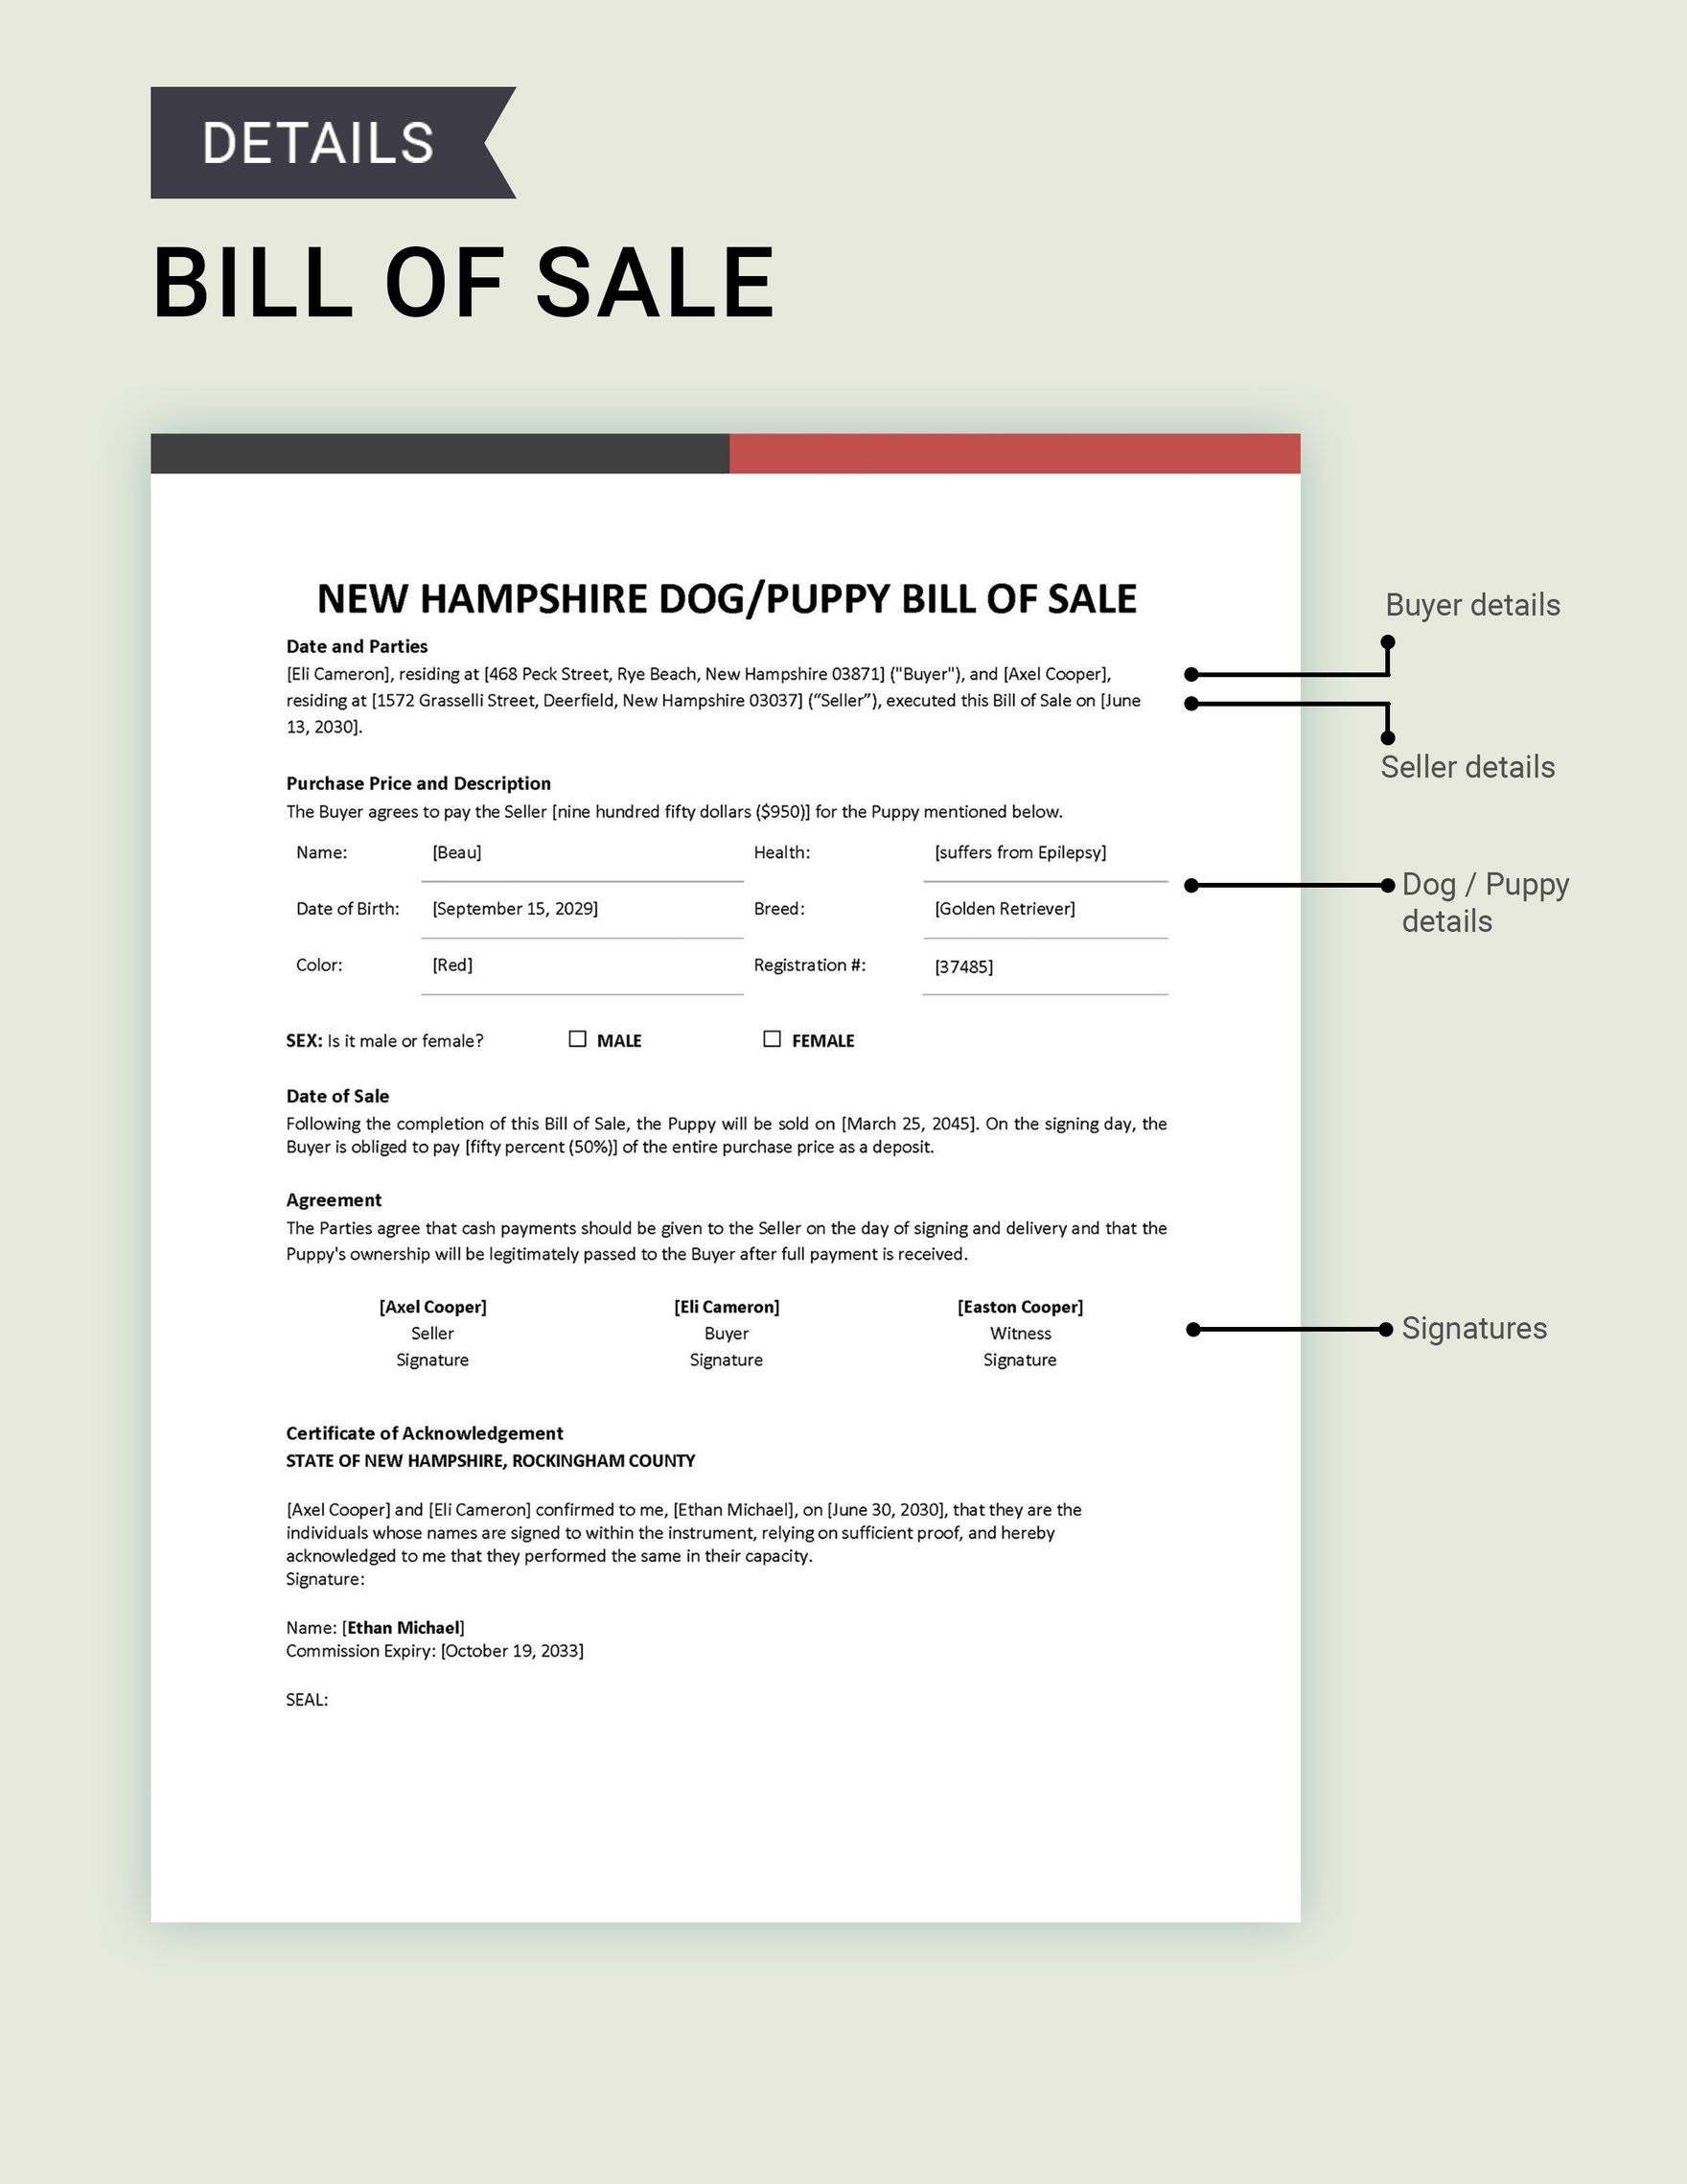 New Hampshire Dog / Puppy Bill of Sale Template